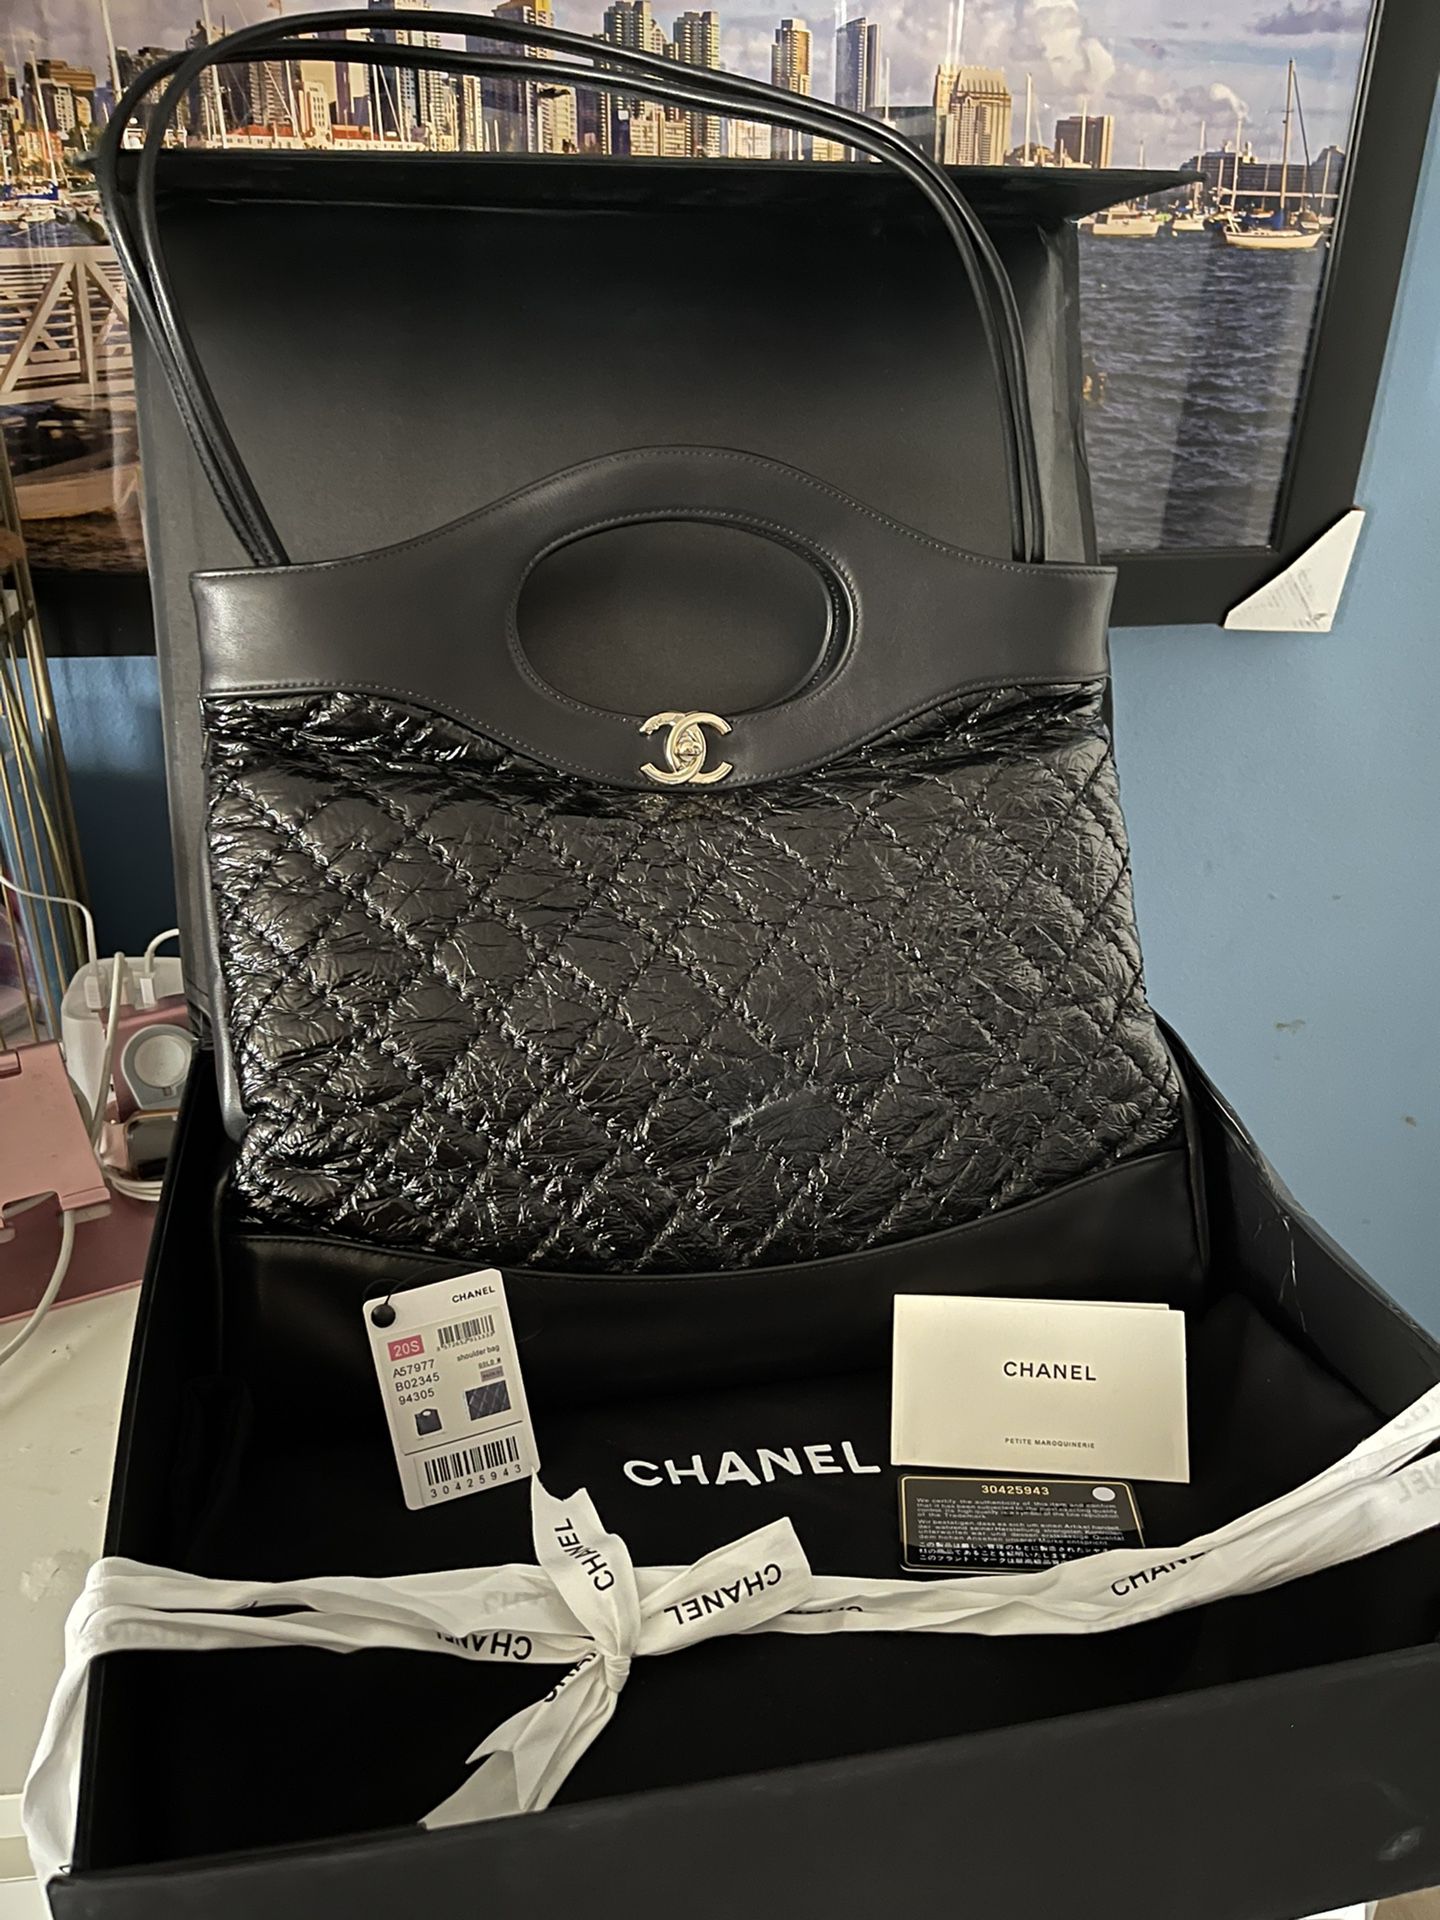 Chanel 31 Shopping Bag for Sale in San Diego, CA - OfferUp